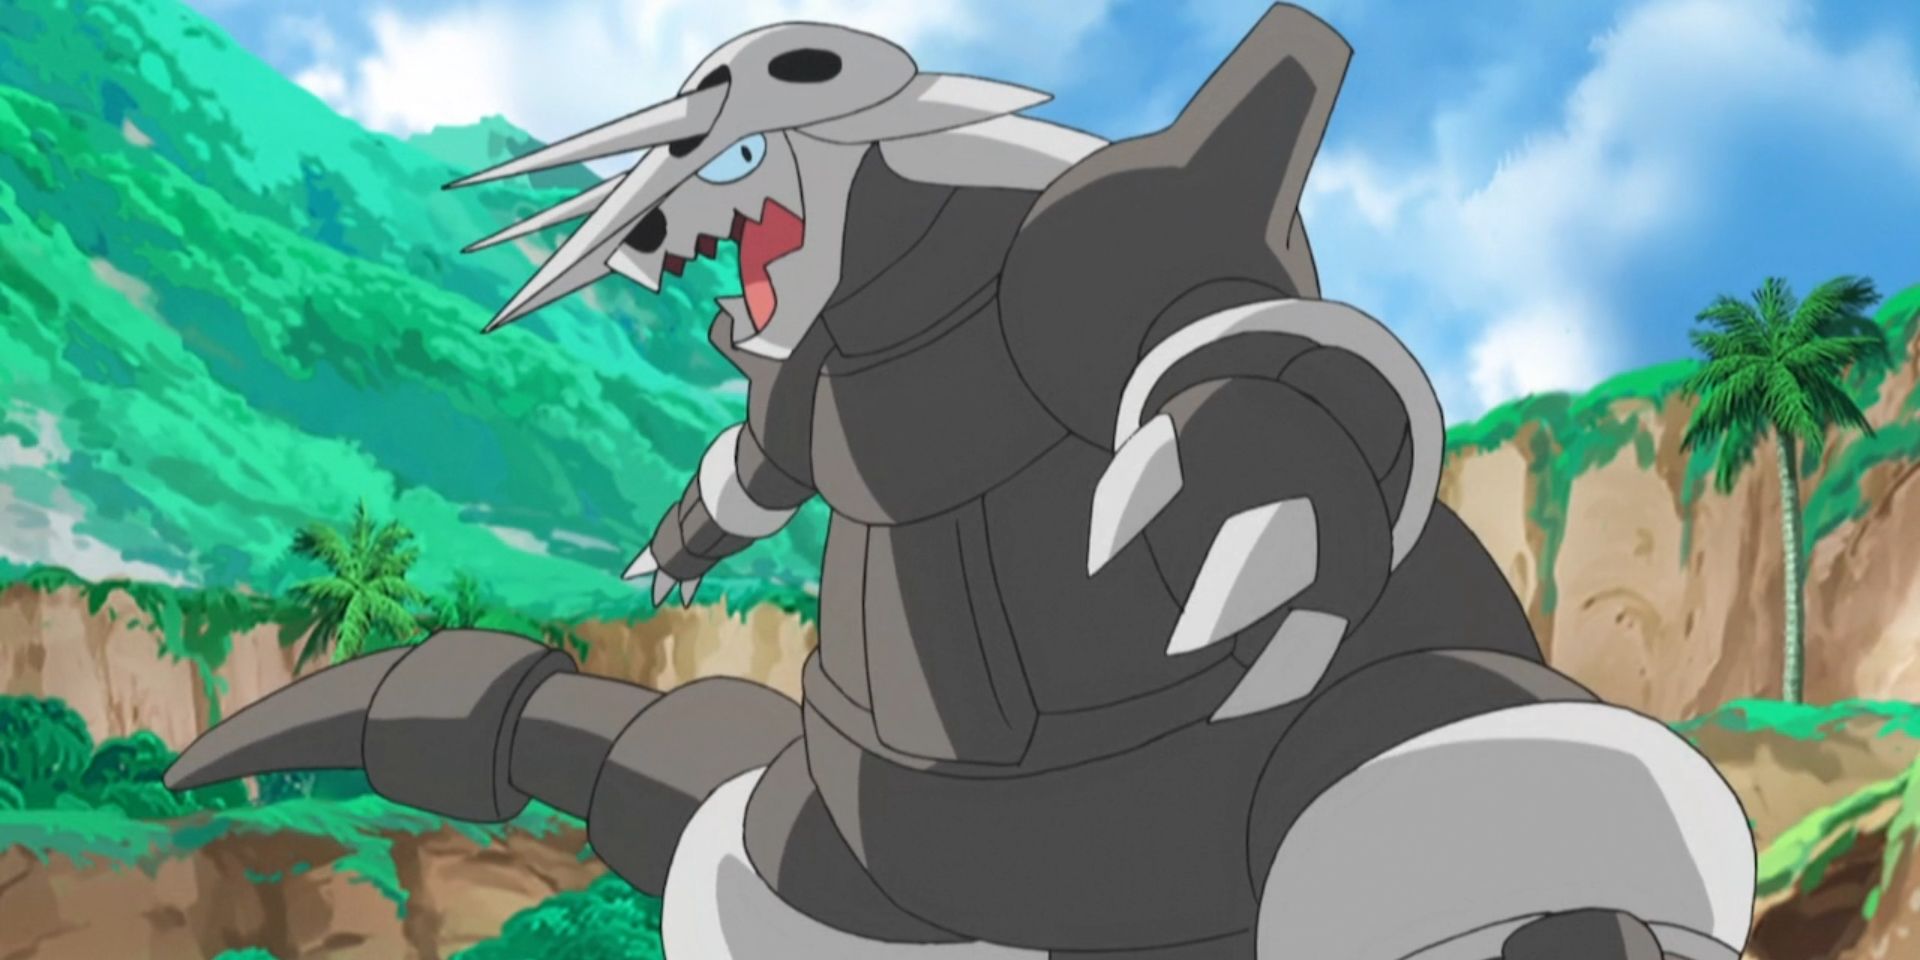 Aggron stands ready to attack in the Pokémon anime.